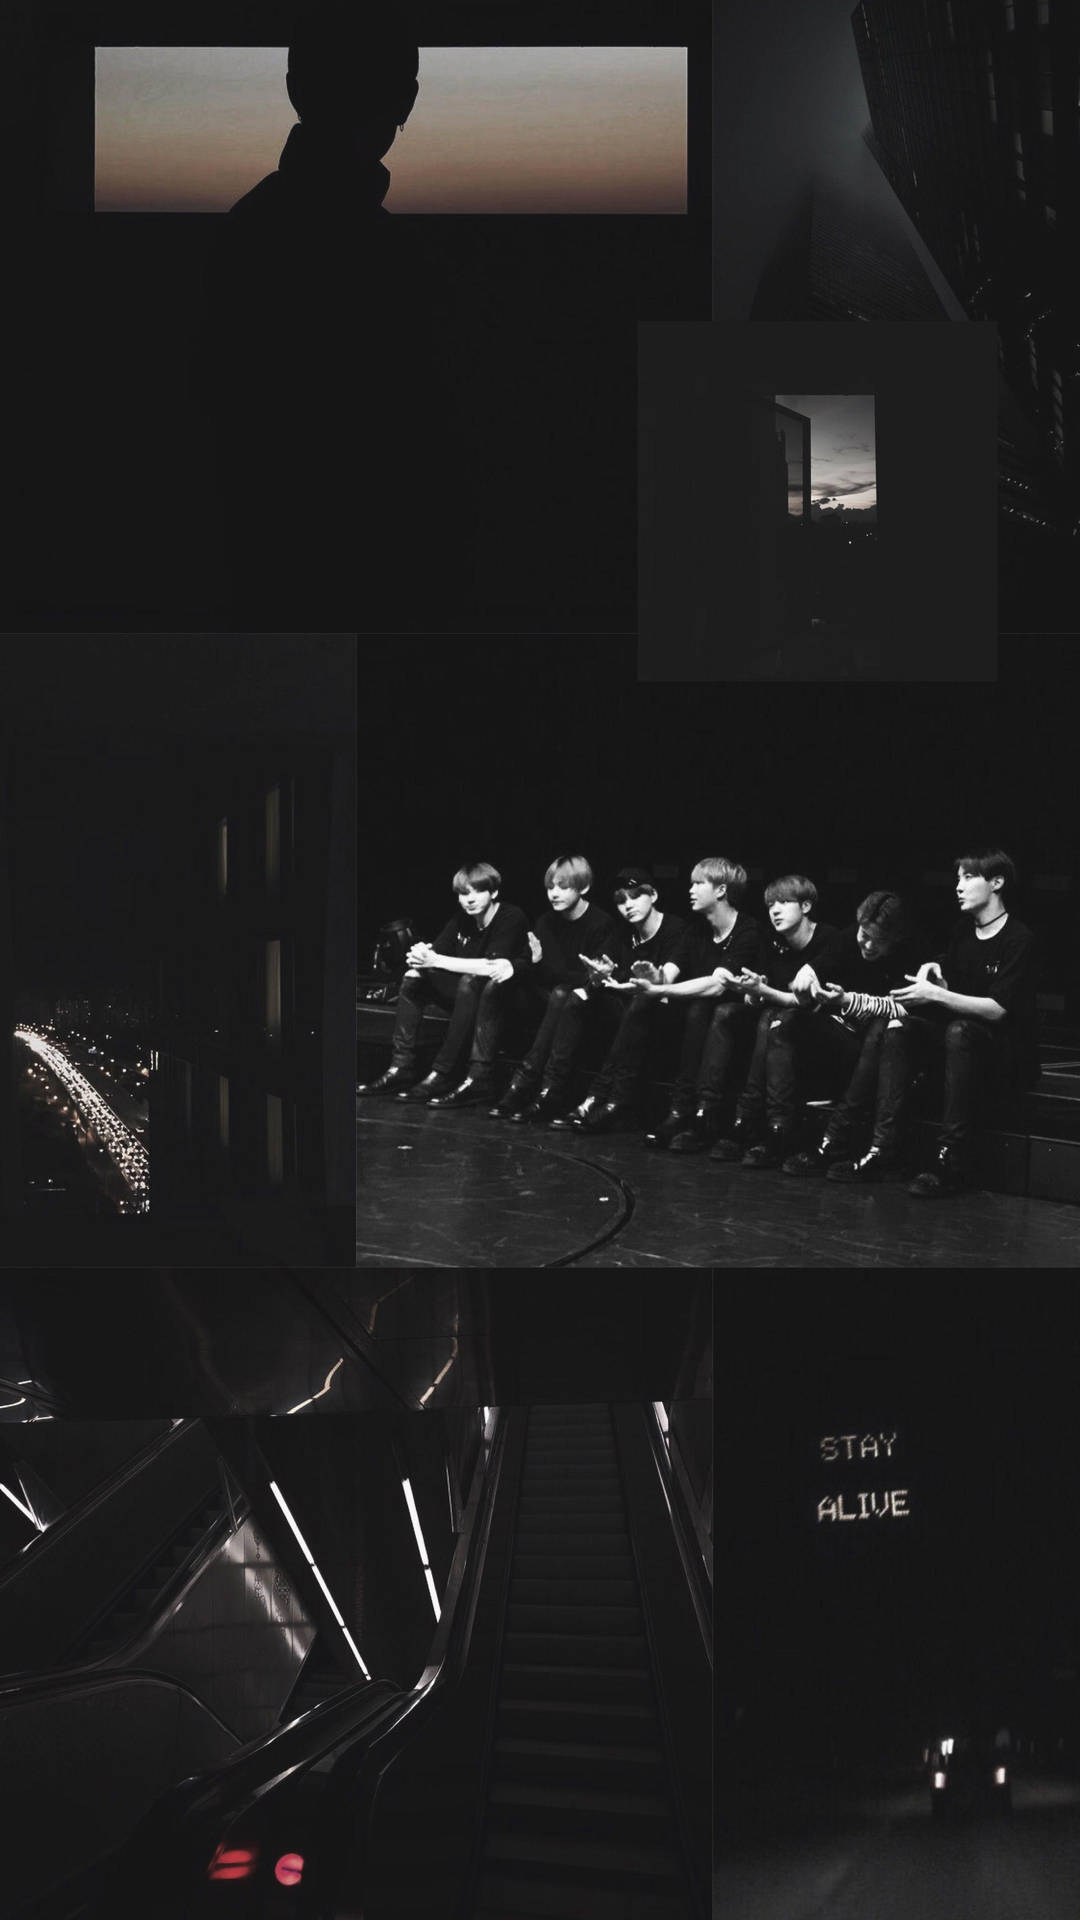 Stay Alive Bts Black Aesthetic Background